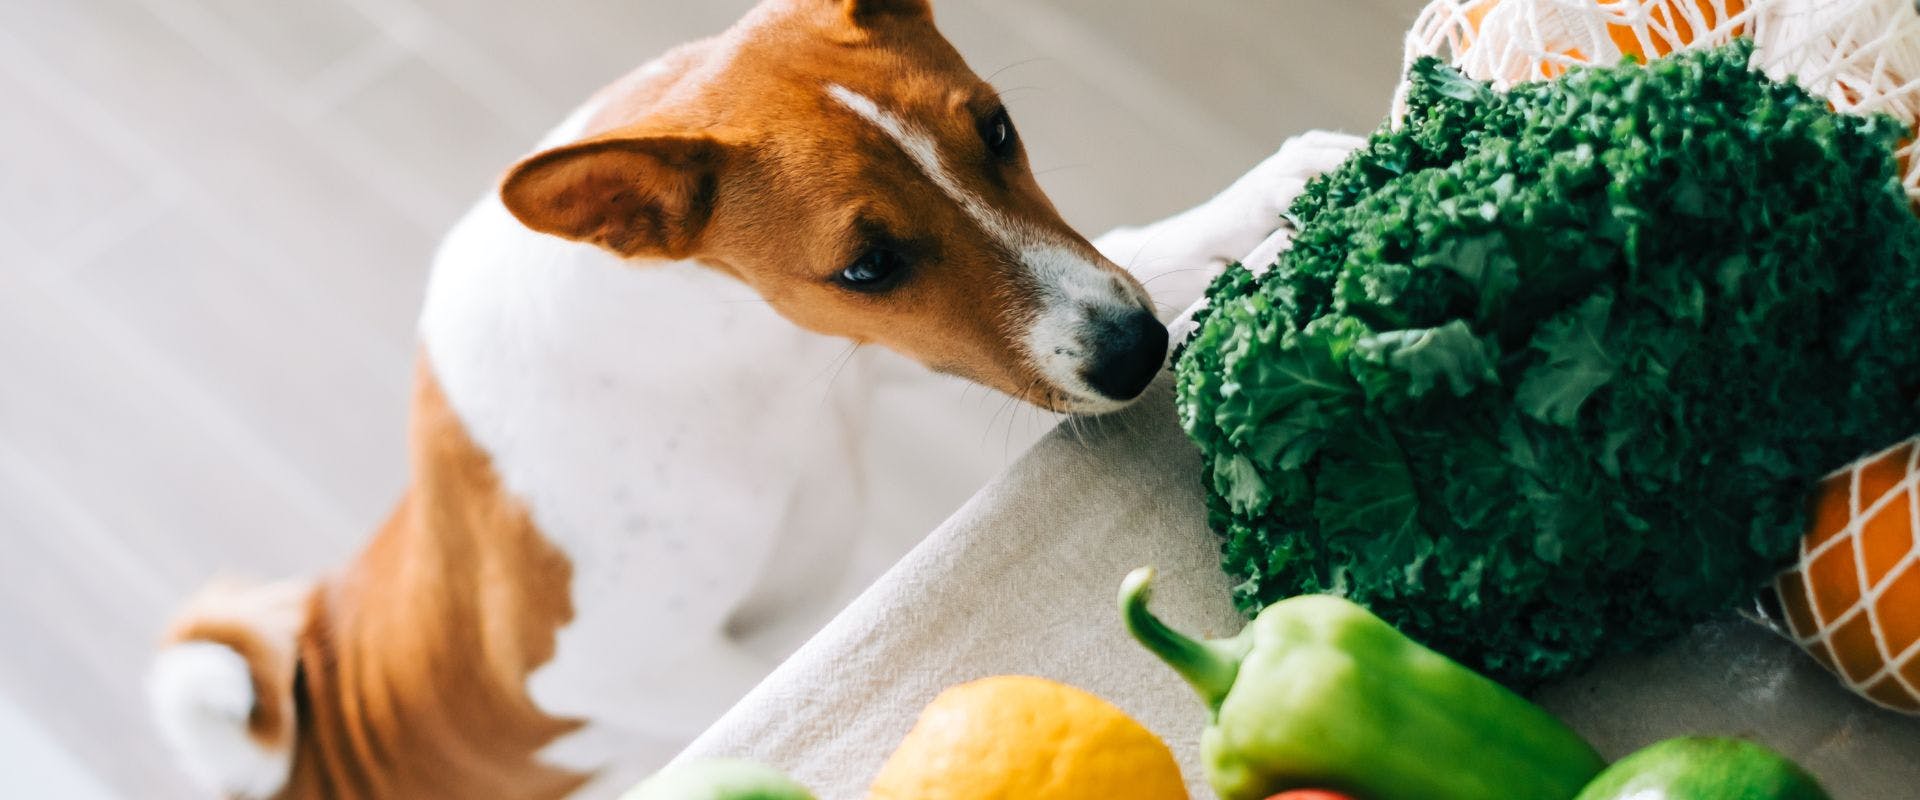 Jack Russell dog sniffing at vegetables